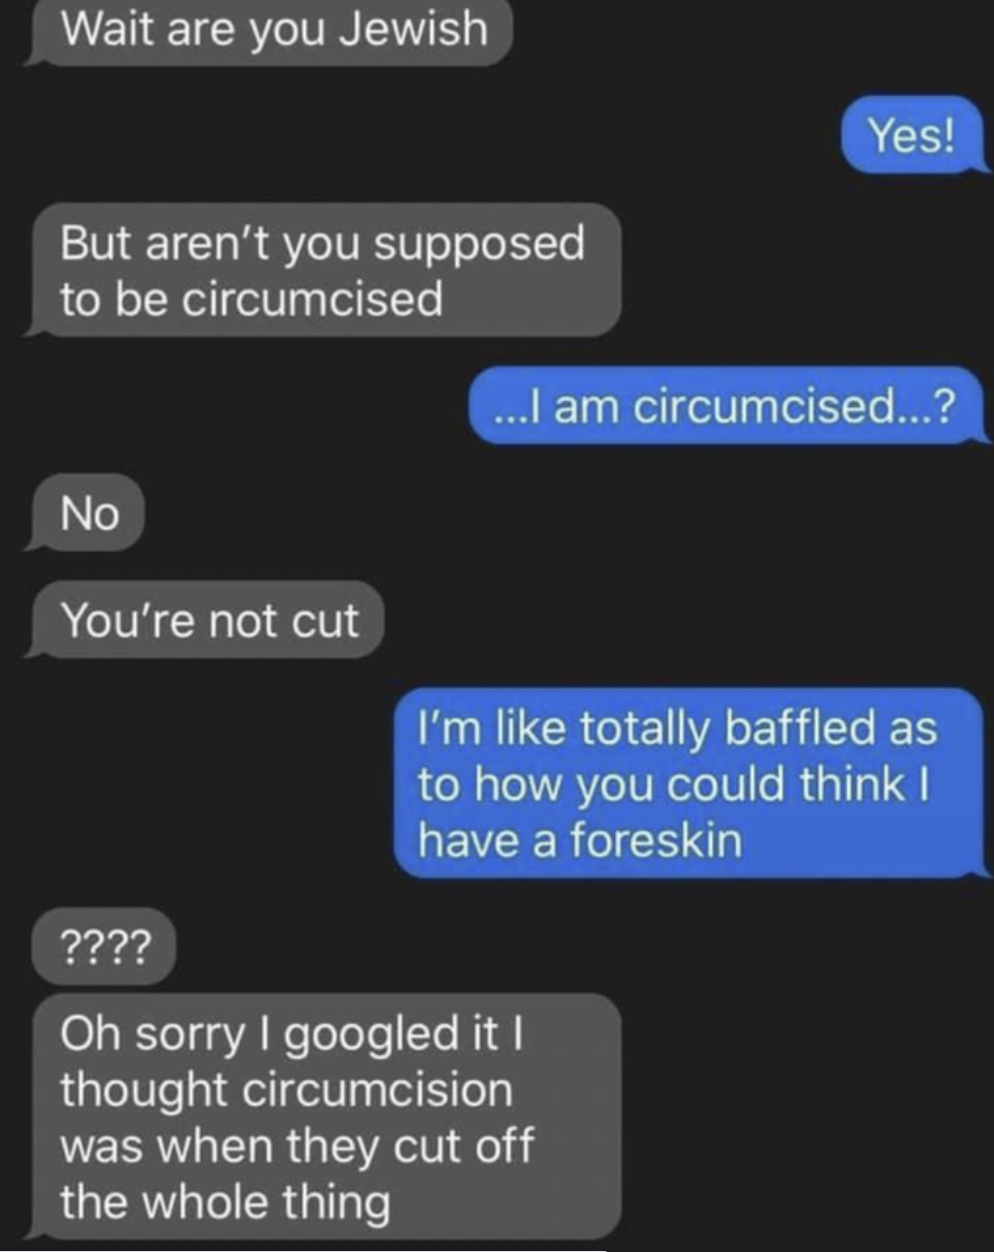 Facepalms - oh sorry i googled it i thought circumcision - Wait are you Jewish But aren't you supposed to be circumcised No You're not cut Yes! ...I am circumcised...? I'm totally baffled as to how you could think I have a foreskin ???? Oh sorry I googled